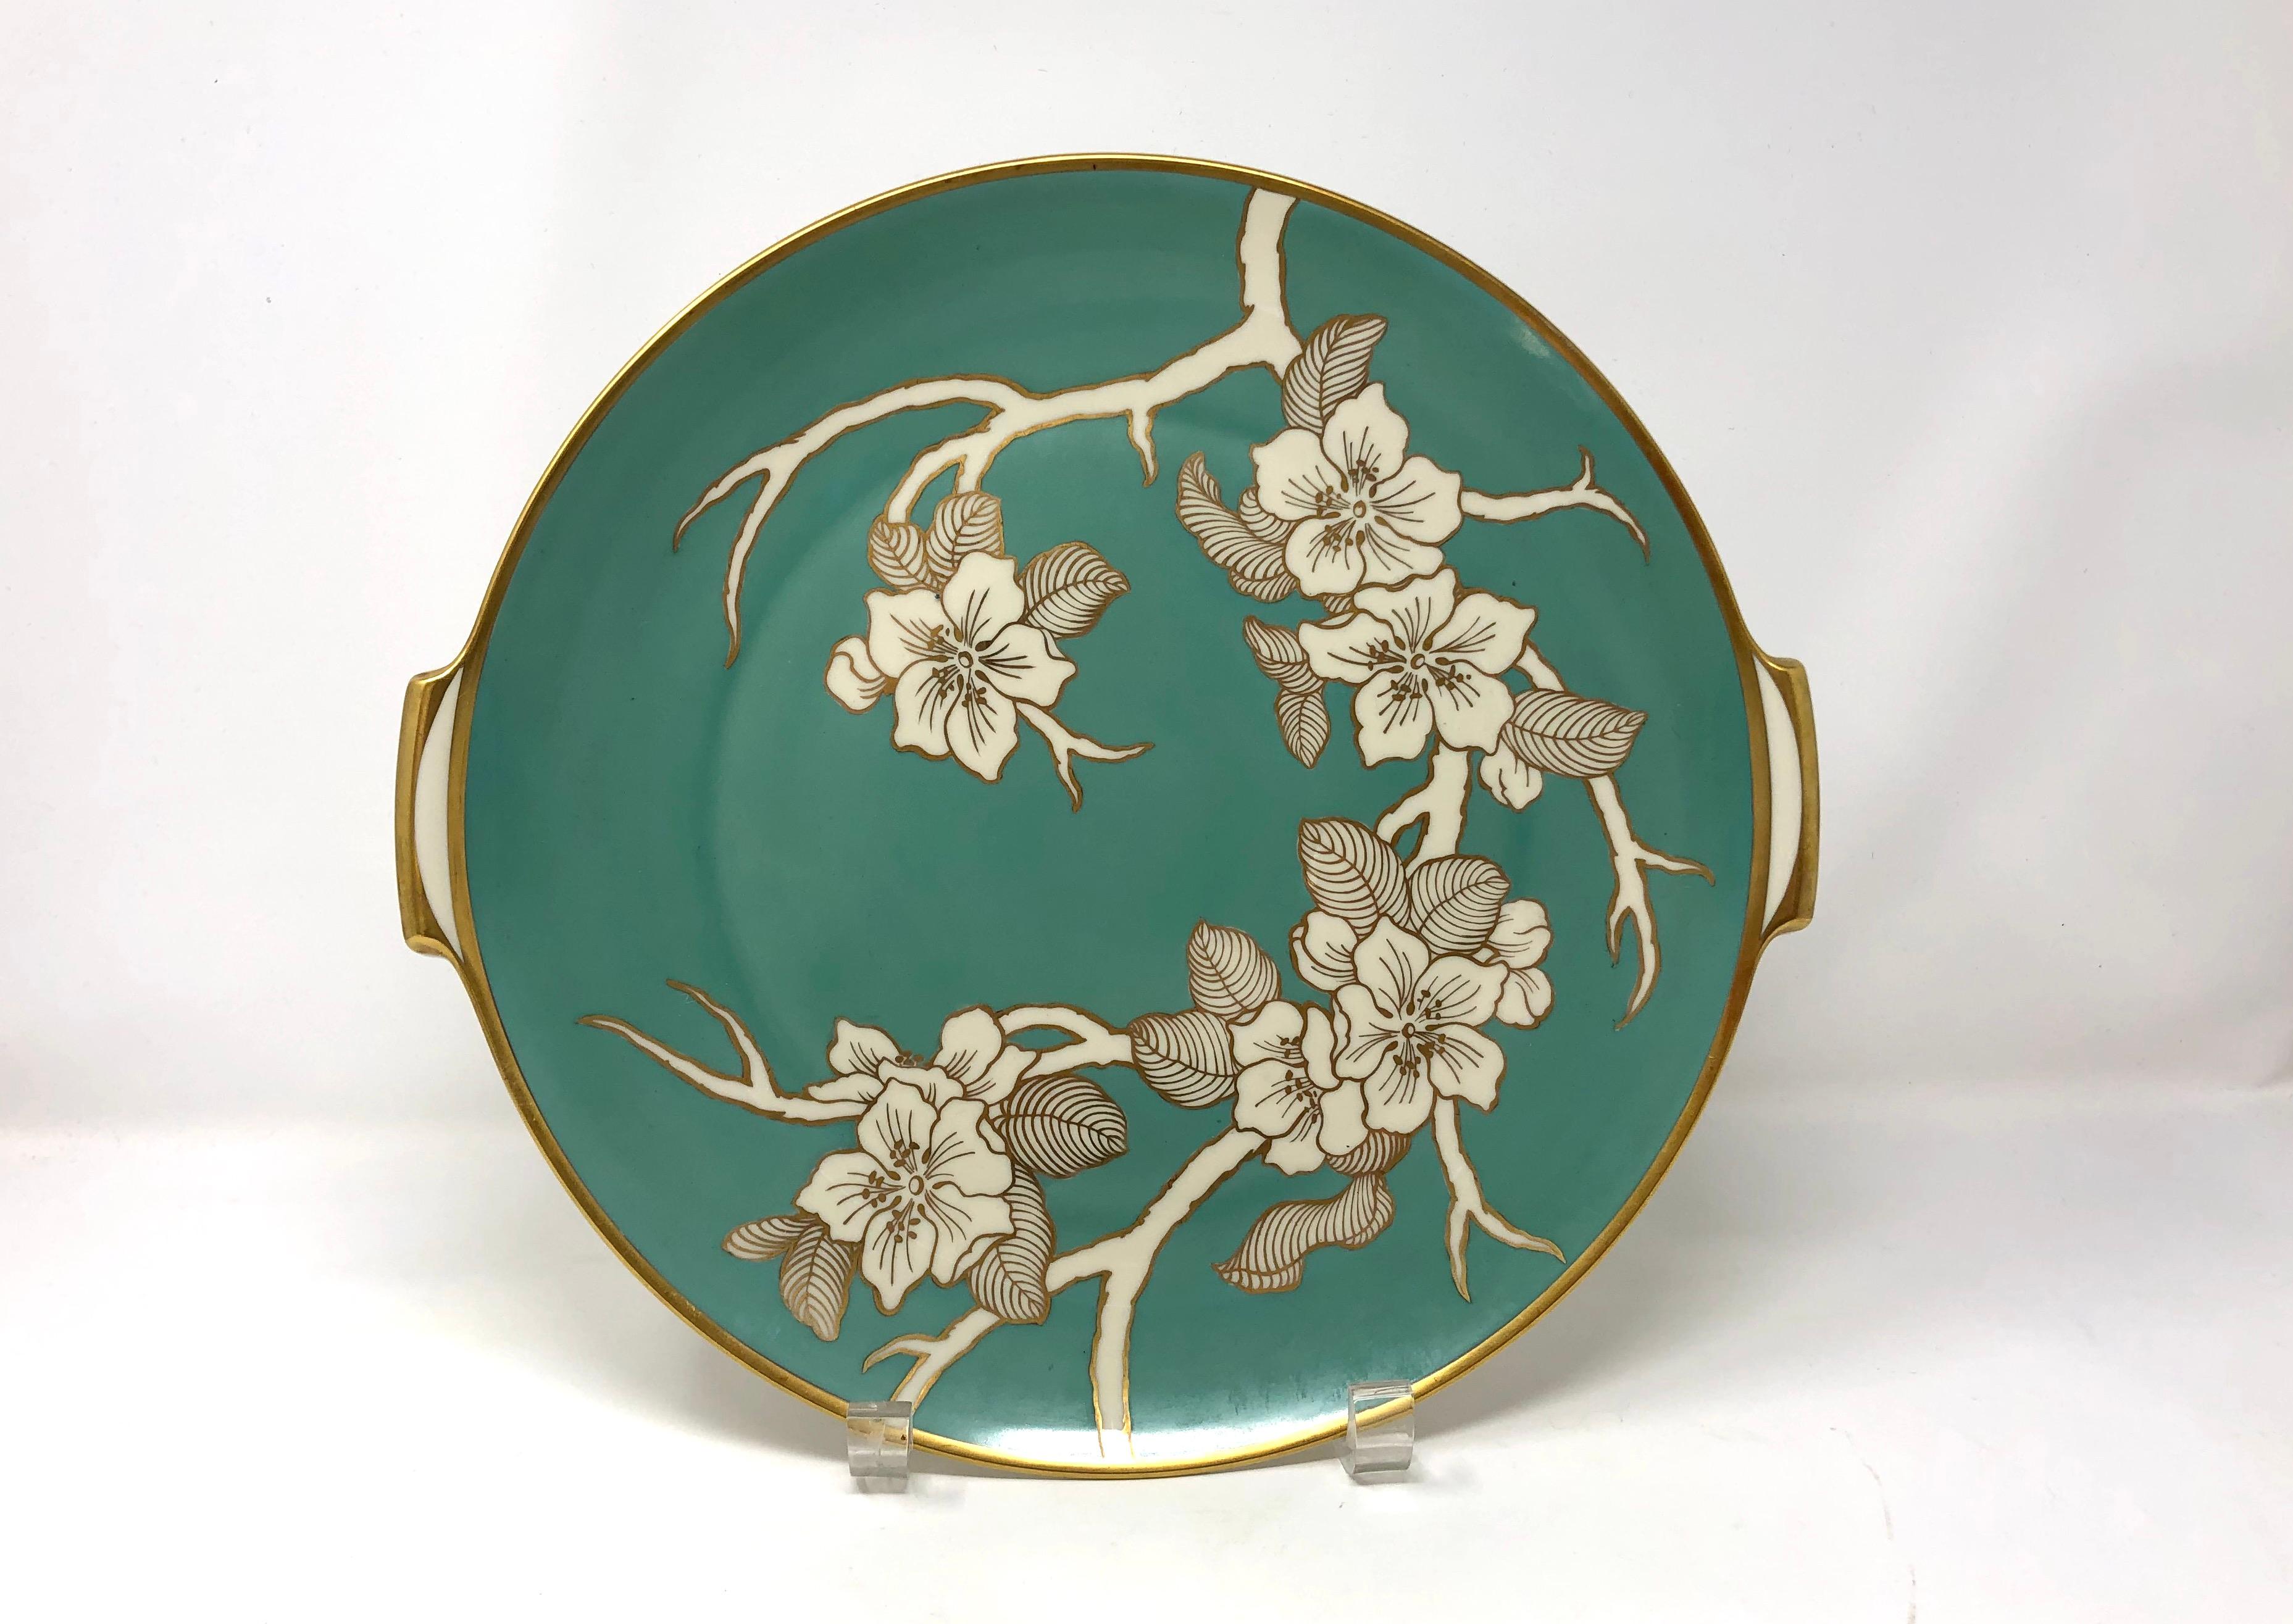 Eye-catching, romantic Rosenthal Selb hand-painted serving plate or platter with cherry blossoms outlined in gold, set on a background of the loveliest greenish-blue. This is not your grandmother's floral platter! Very classy with perfectly